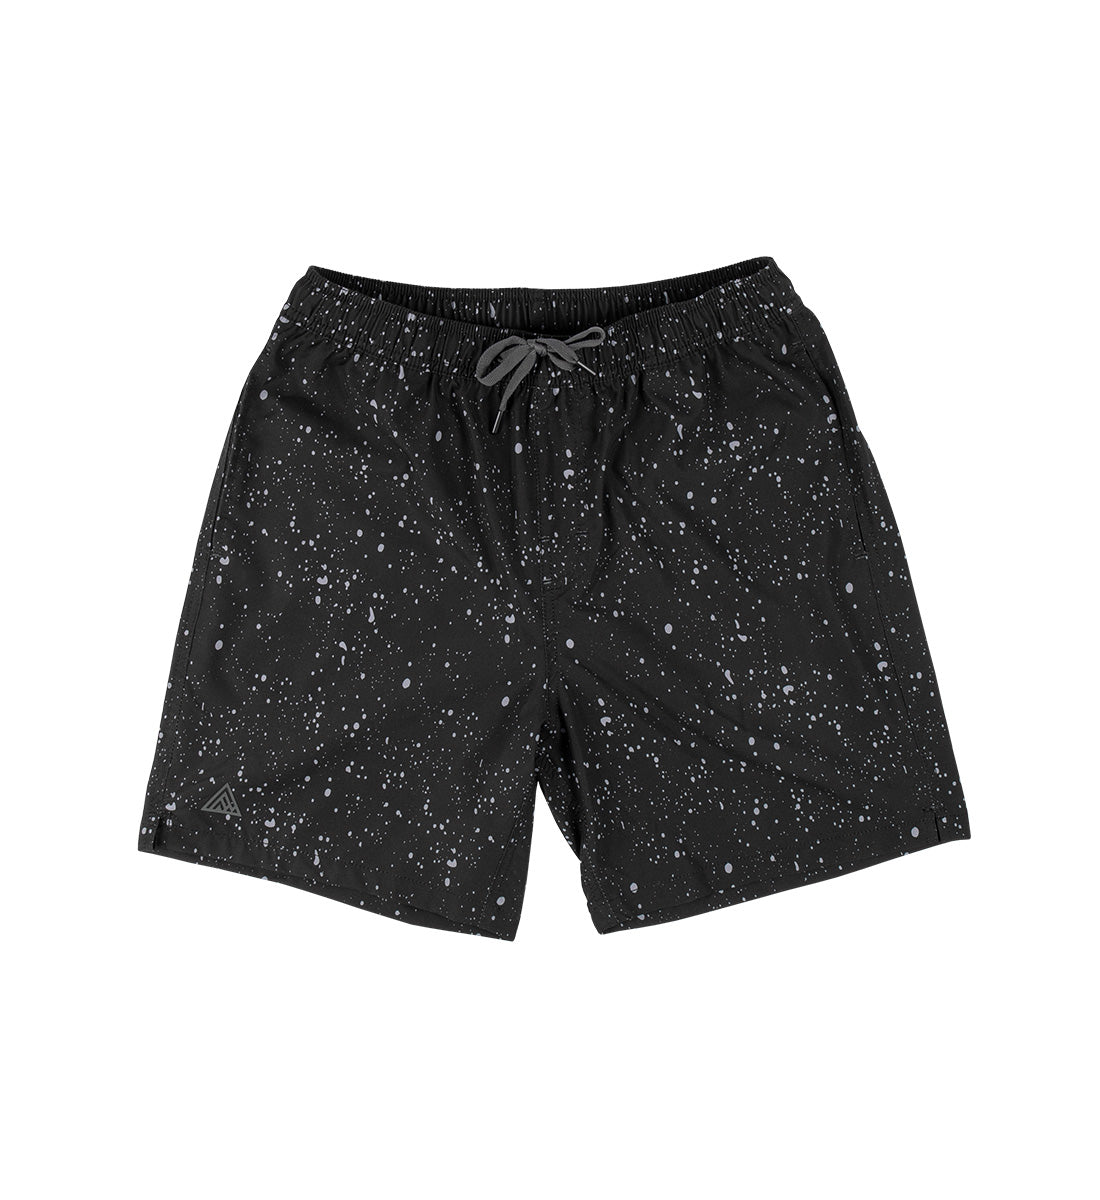 Momentum Shorts - Speckle